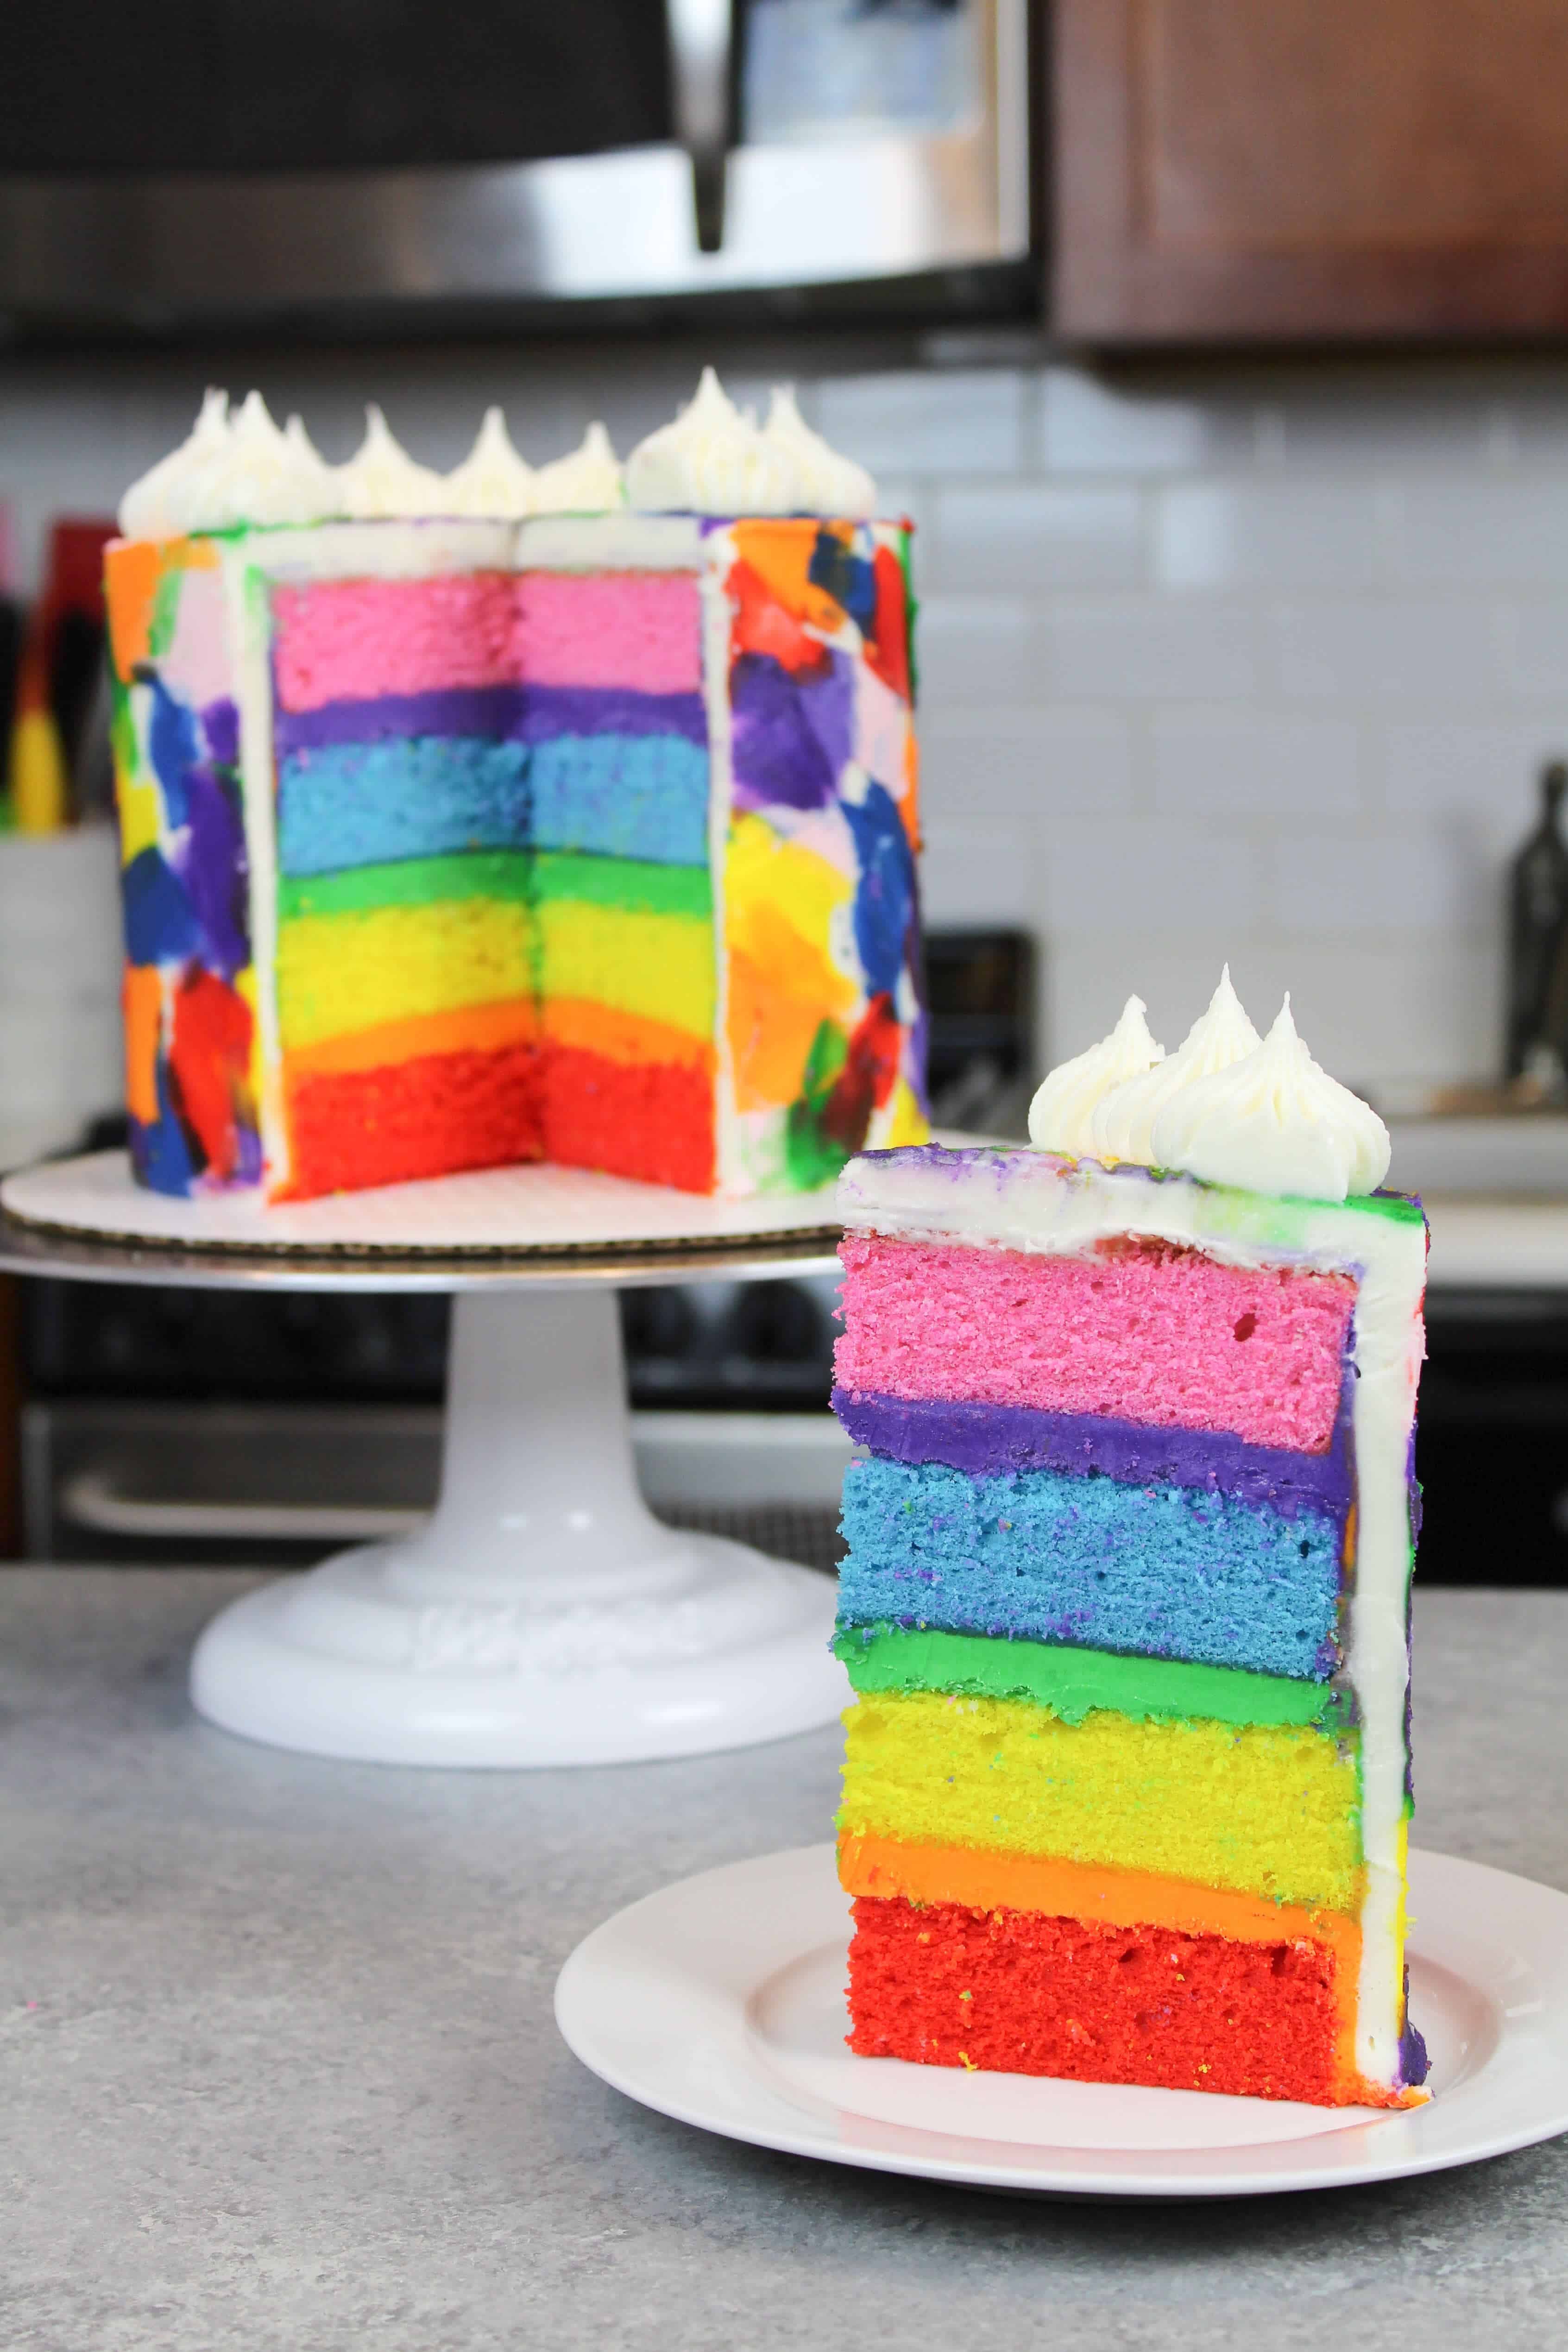 Rainbow Cake Recipe : Made With 4 Cake Layers - Chelsweets